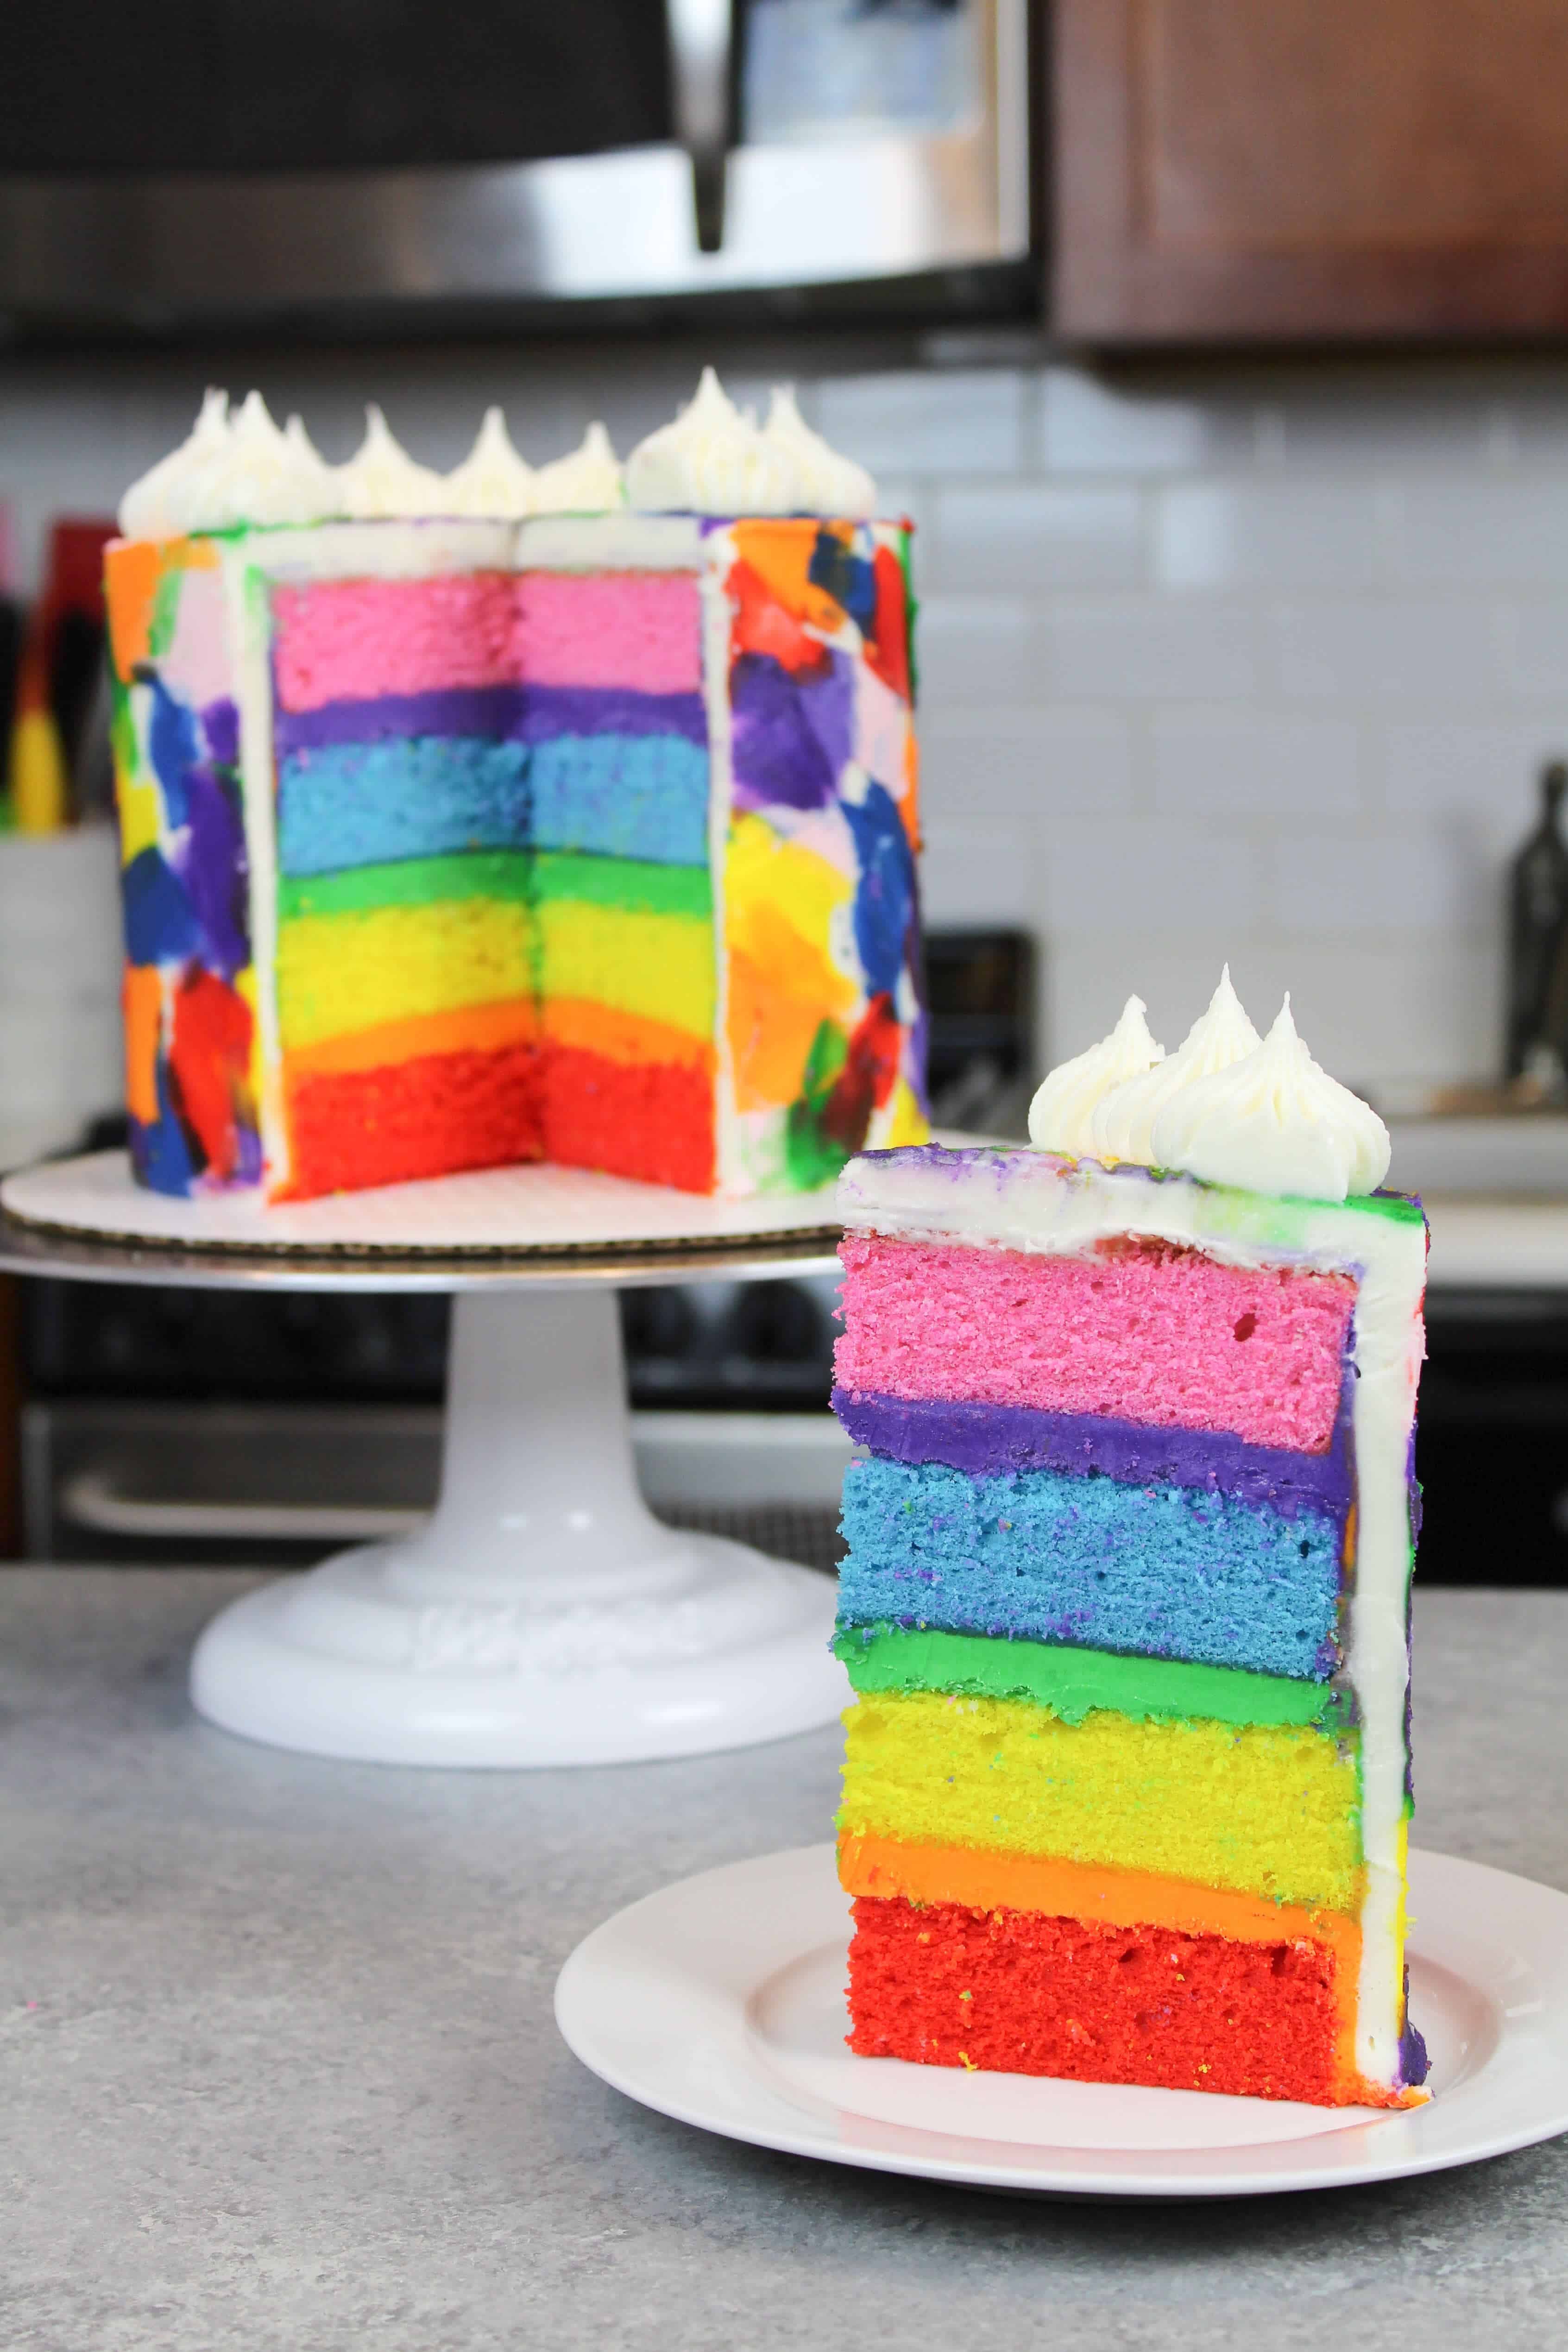 Rainbow Cake Recipe : Made With 4 Cake Layers - Chelsweets